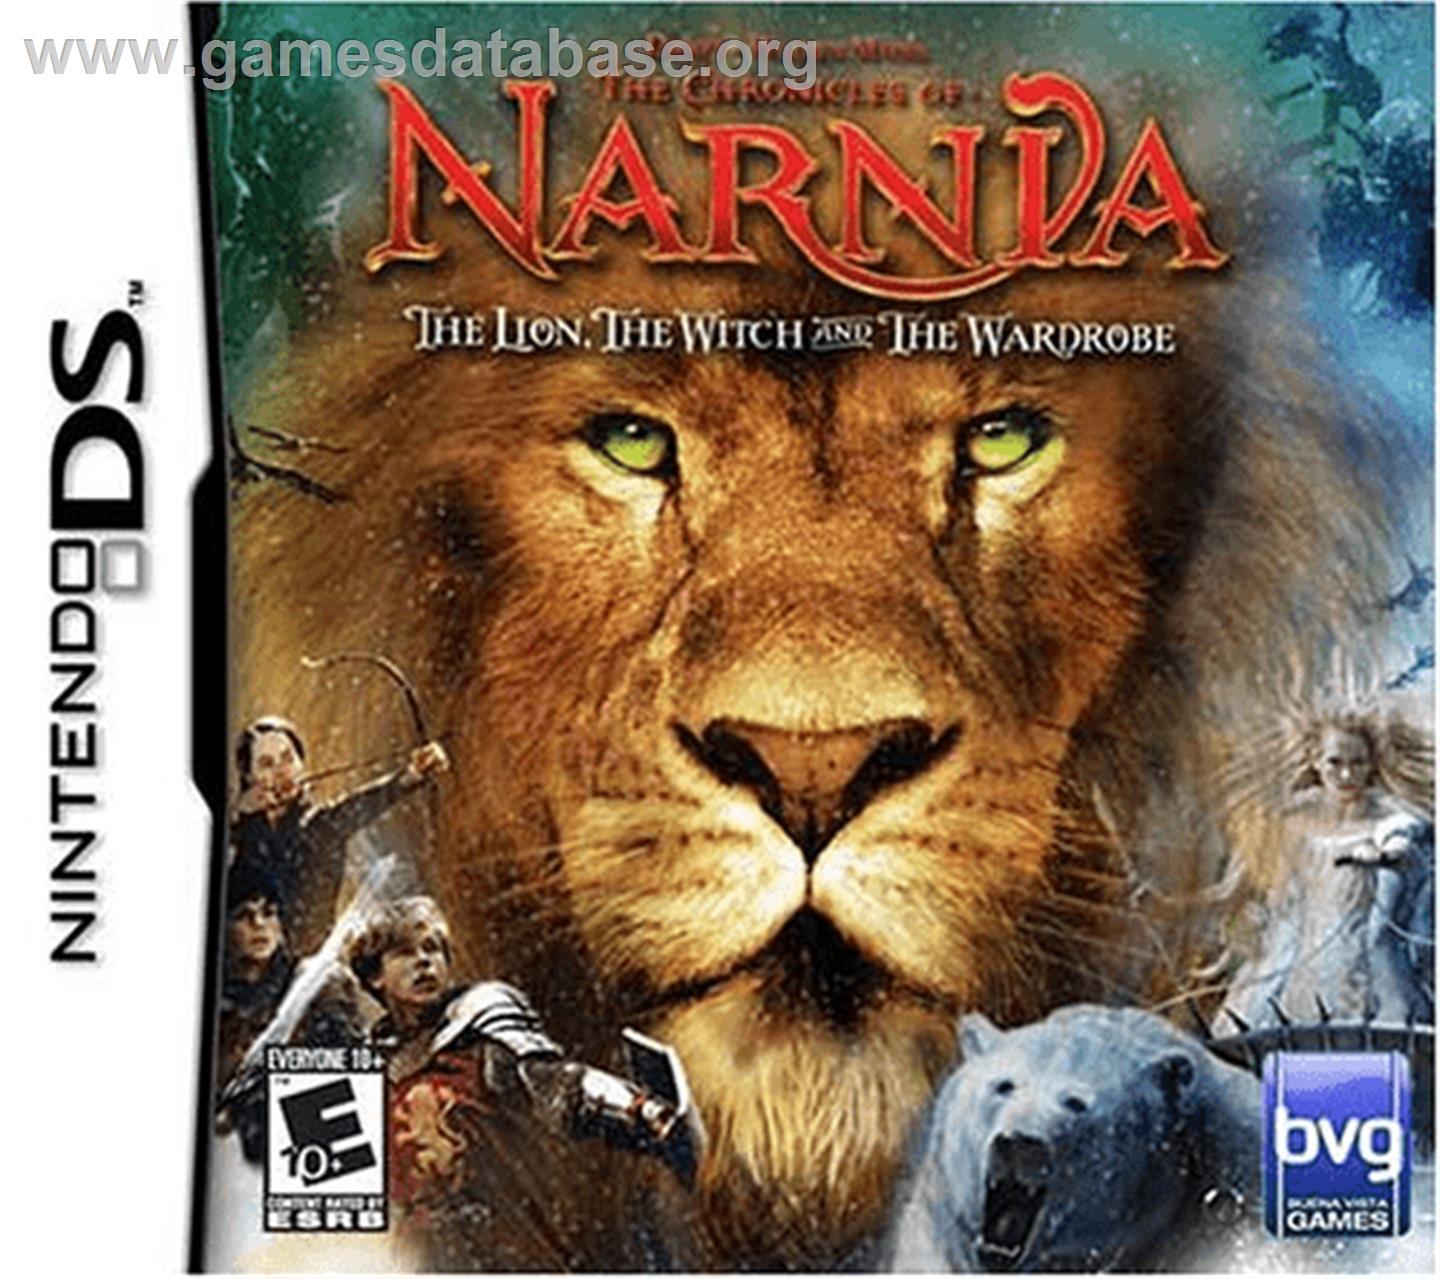 Chronicles of Narnia: The Lion, the Witch and the Wardrobe - Nintendo DS - Artwork - Box